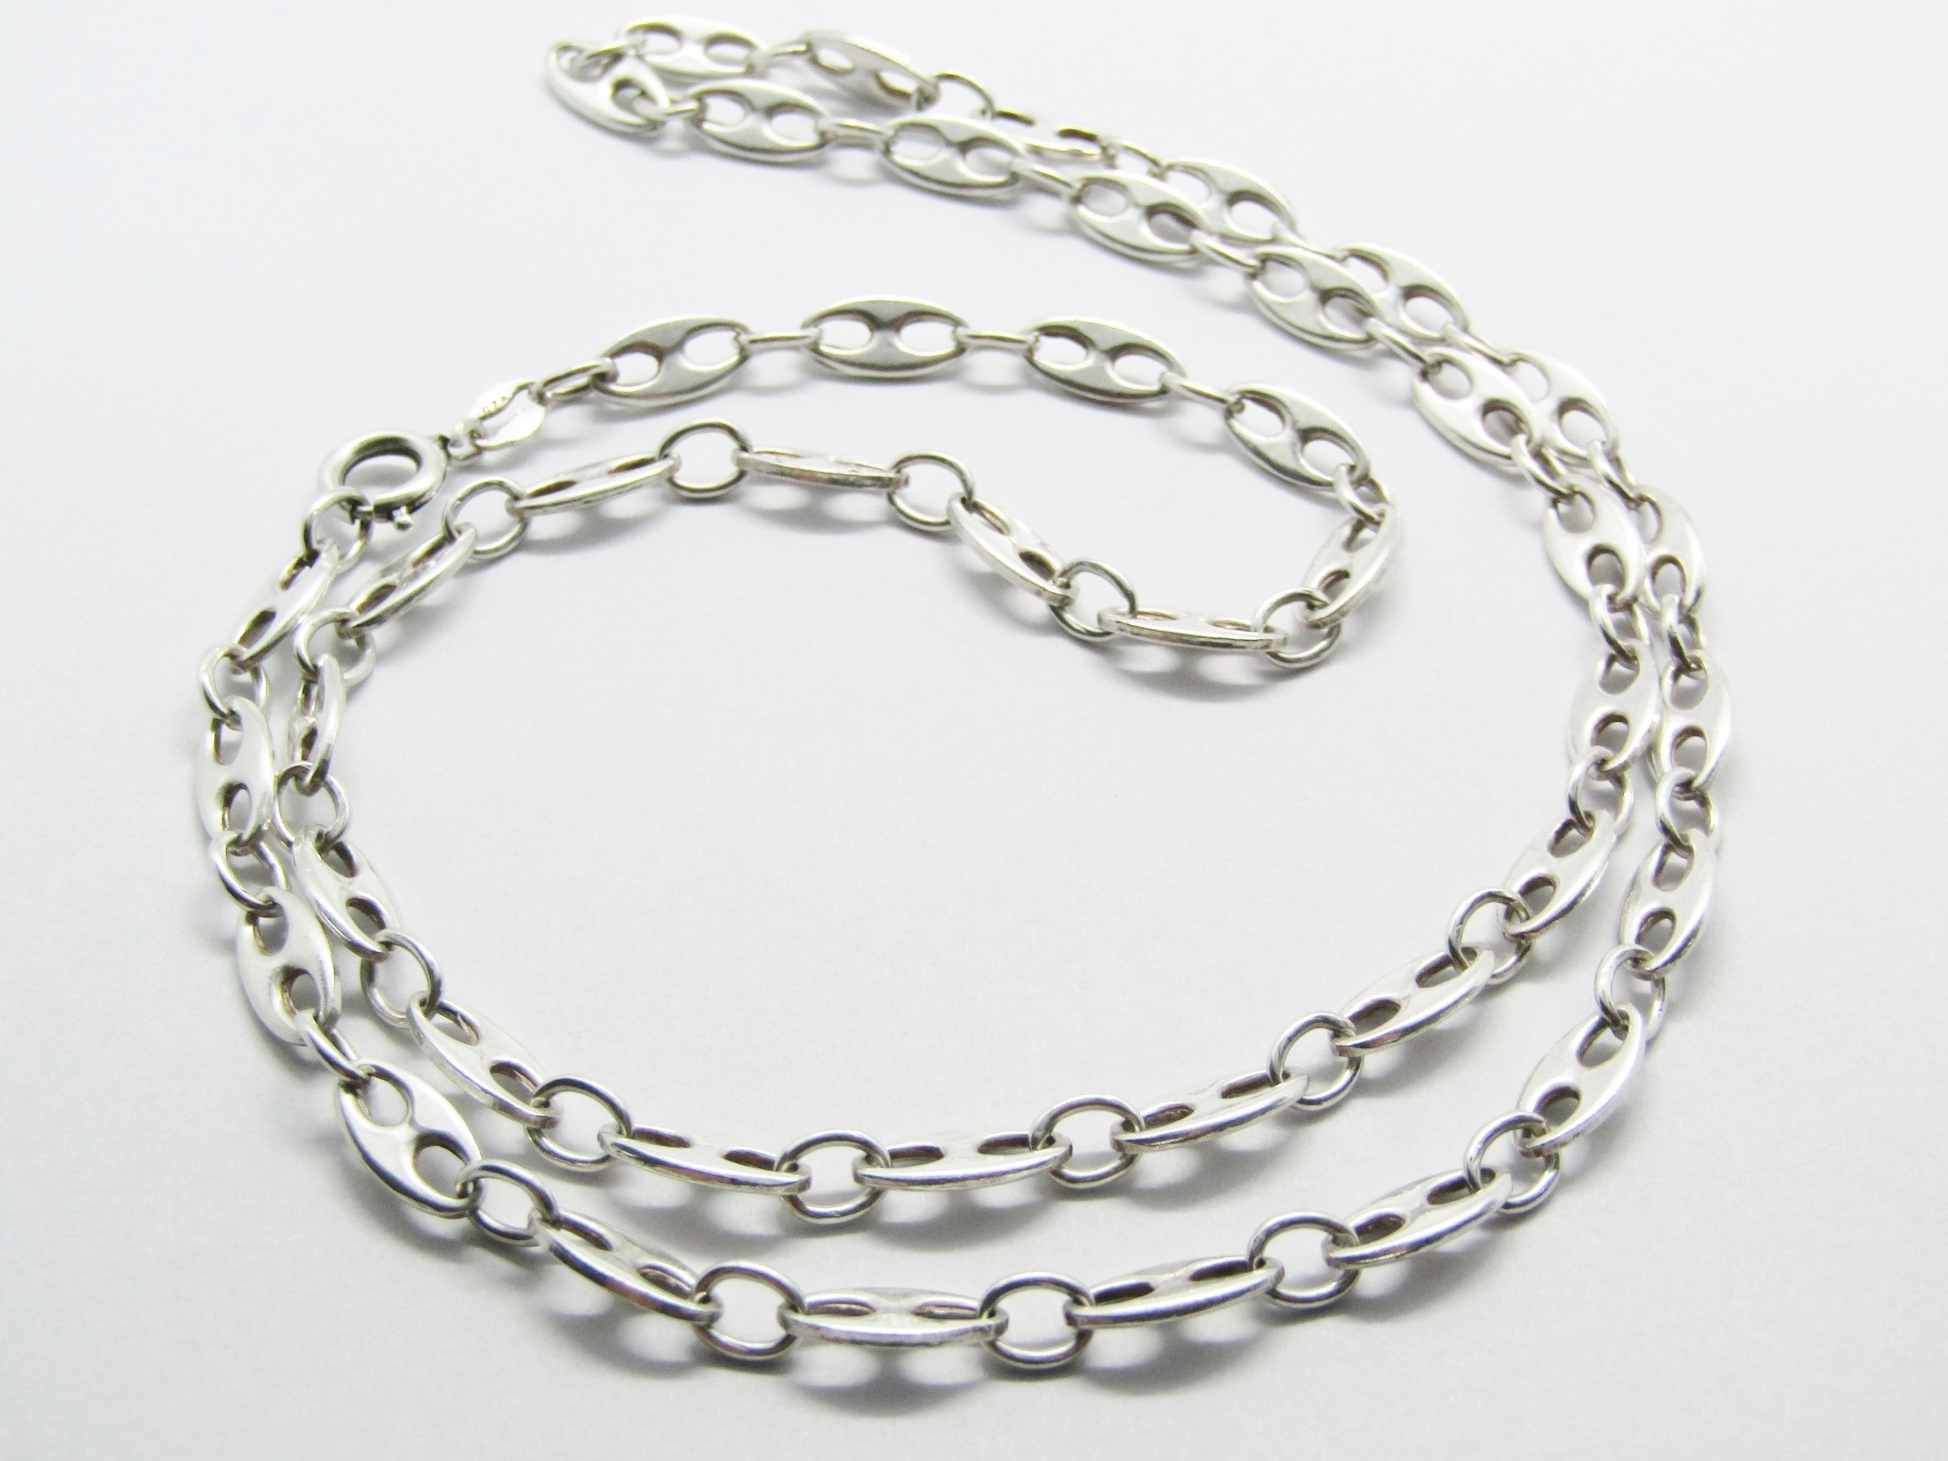 A Lovely Flat Gucci Design Necklace in Sterling Silver.